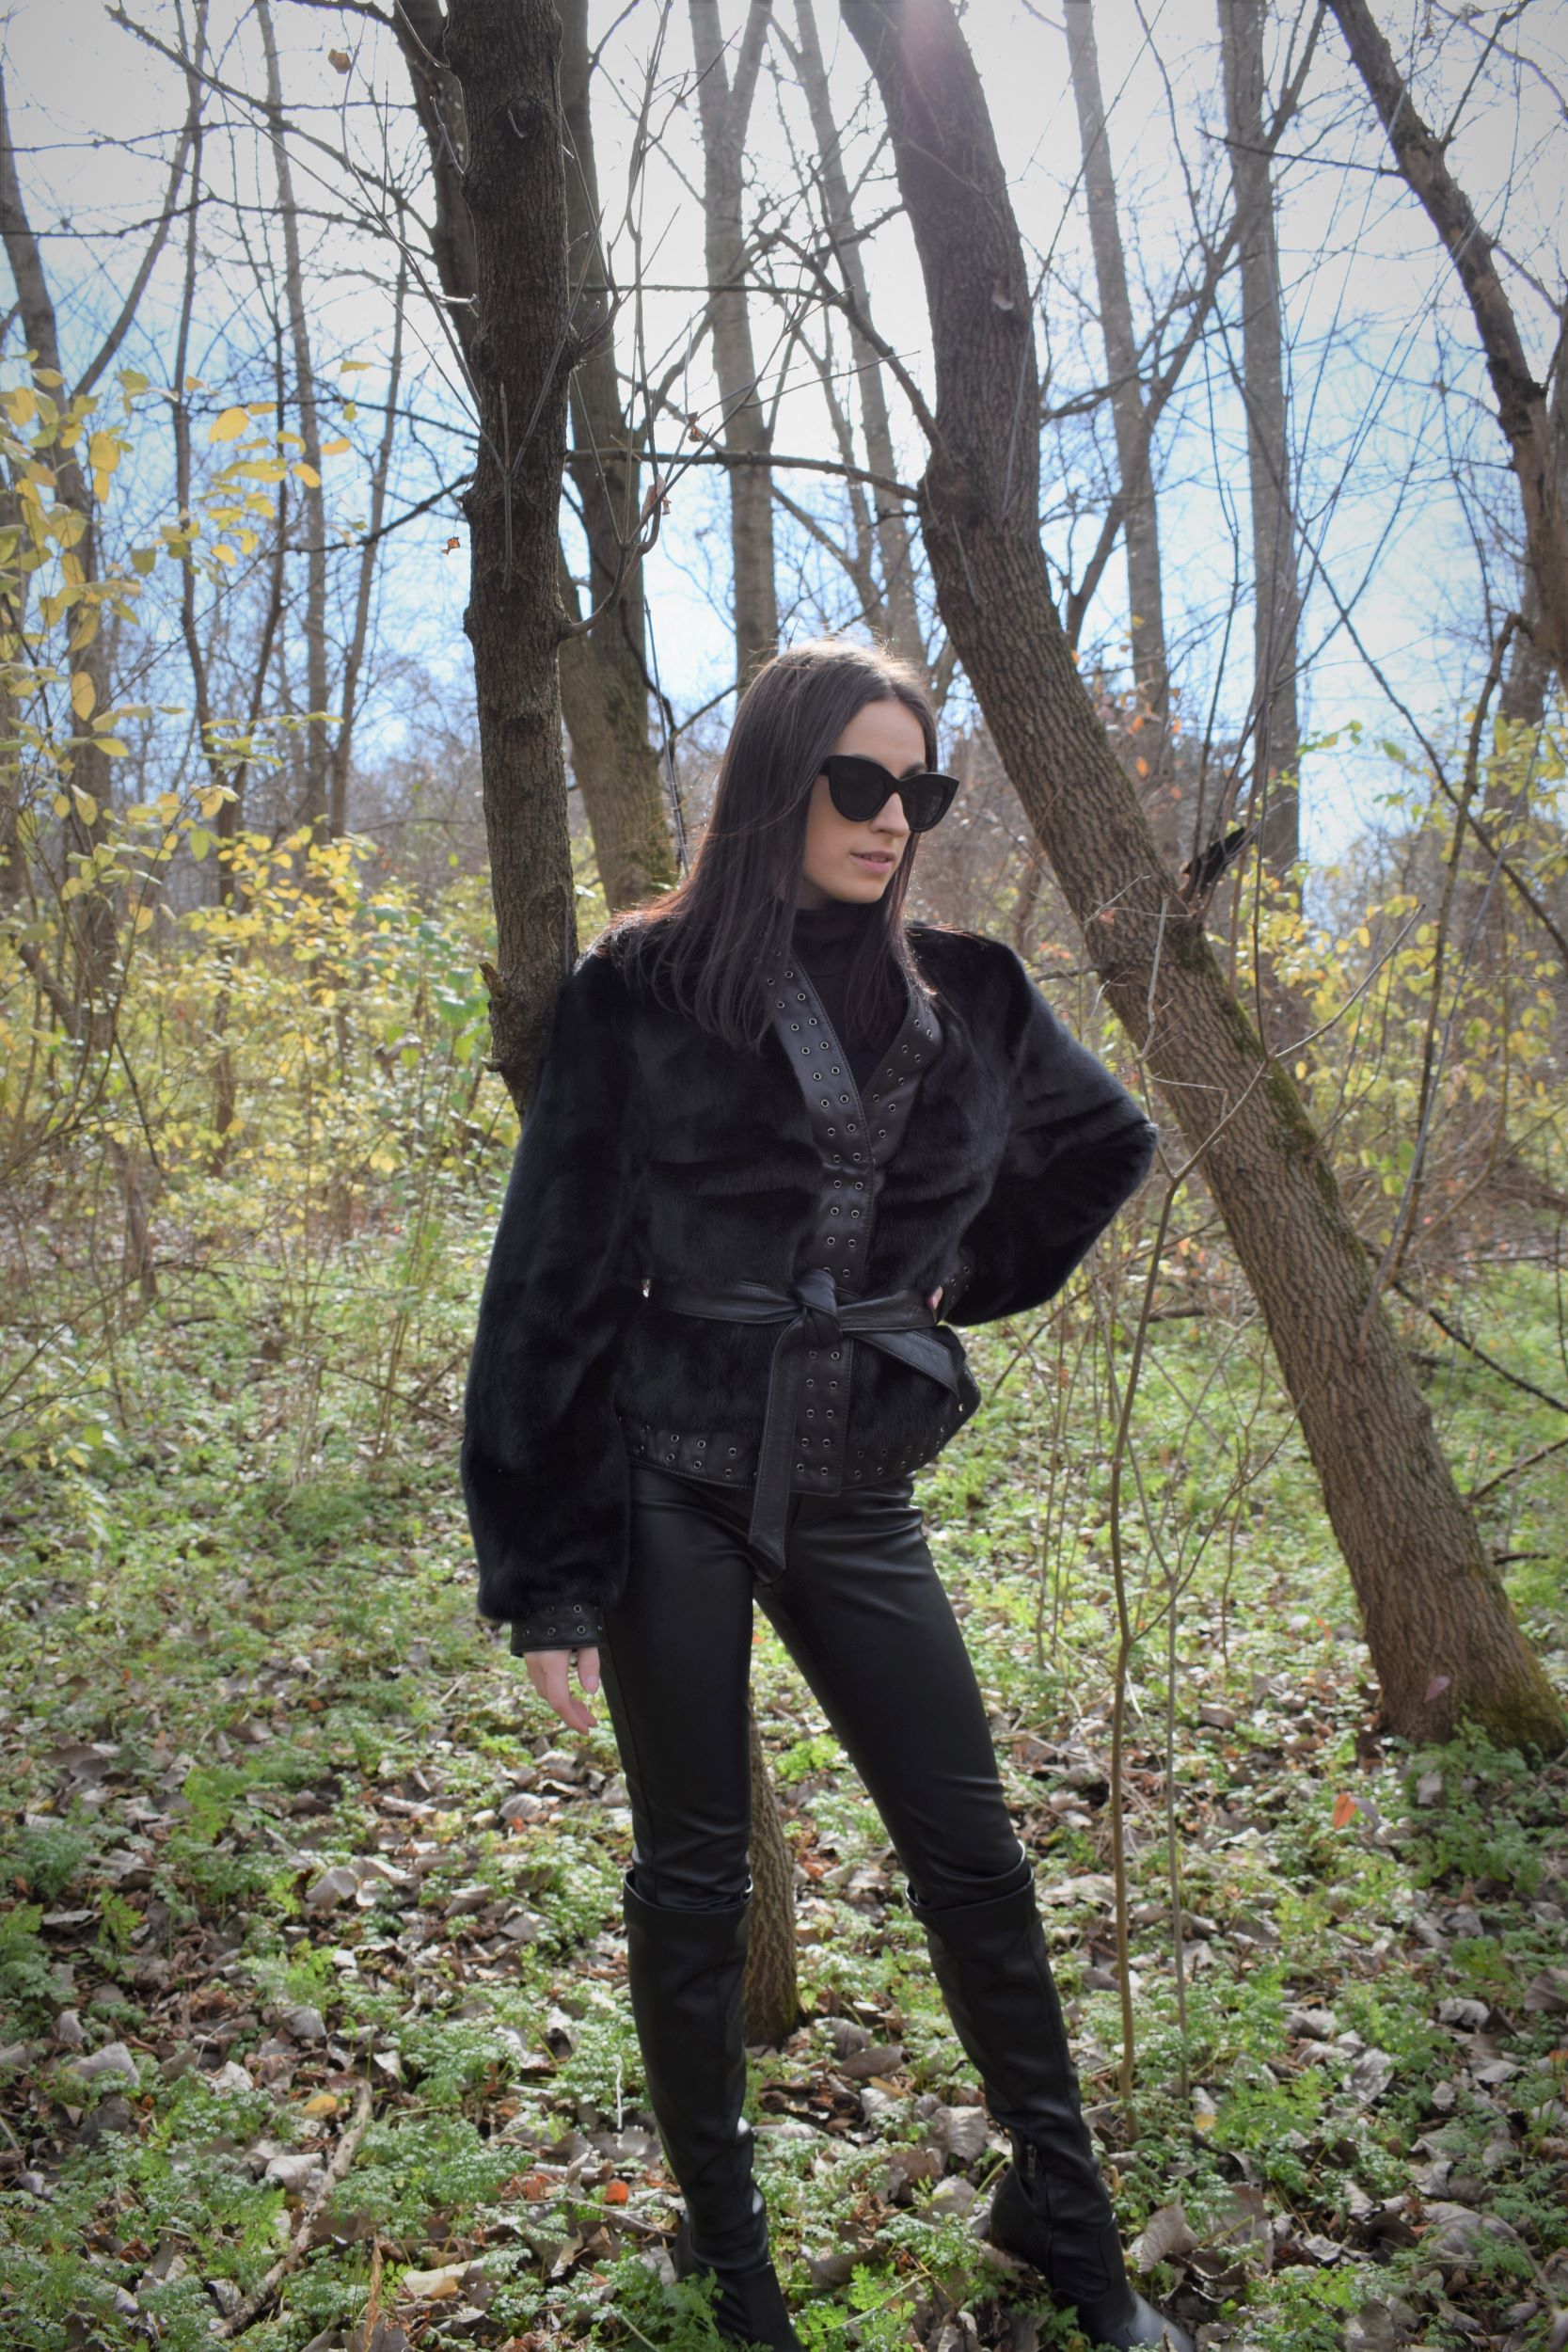 Woman posing with hand on hip in forest while wearing a fur coat and black leather pants